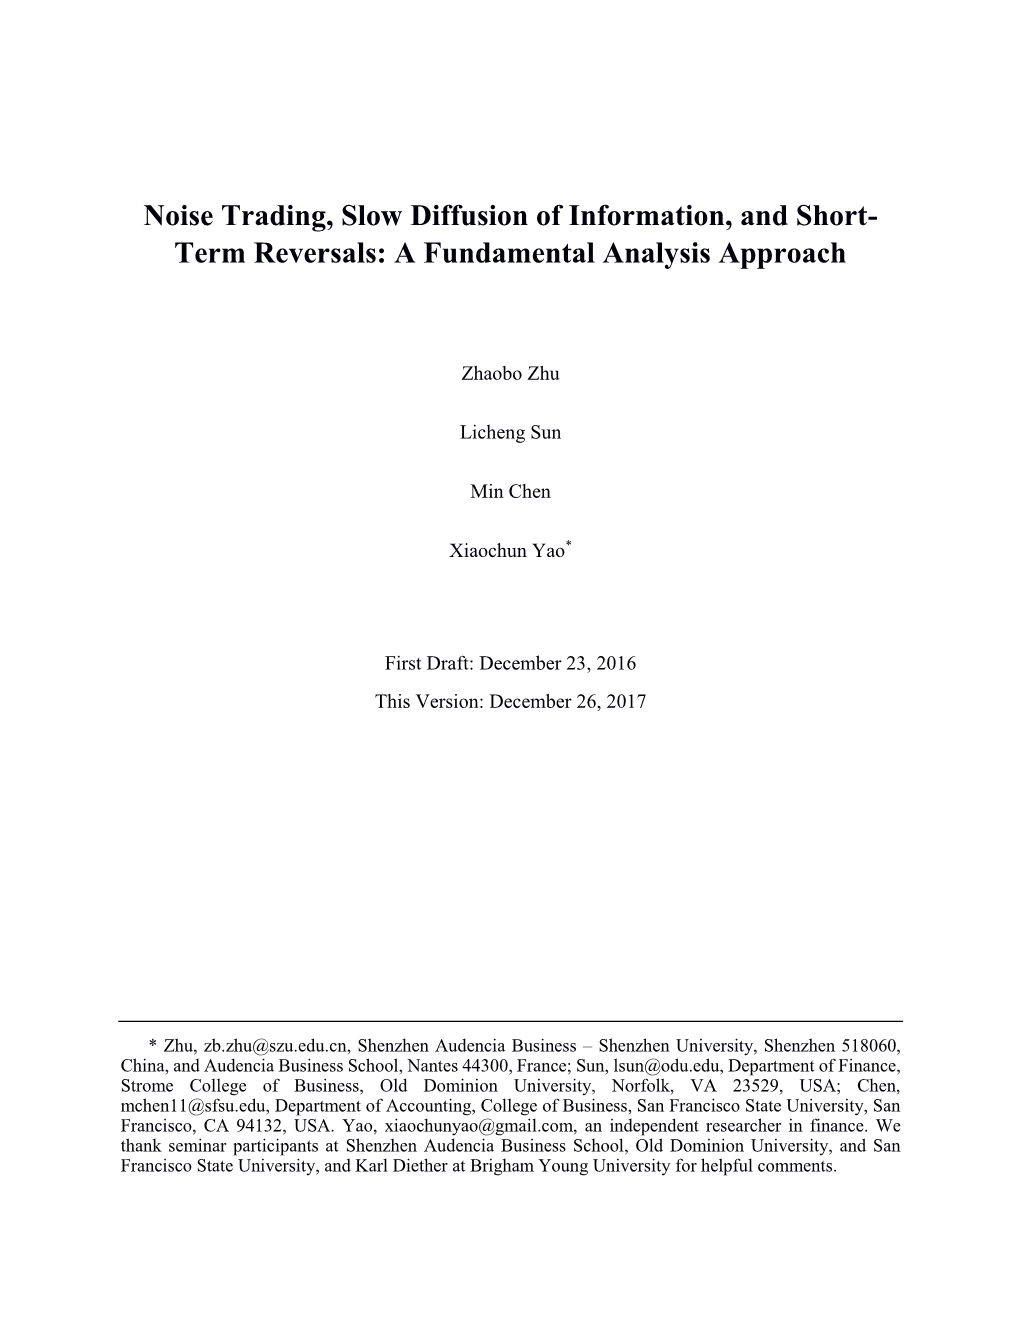 Noise Trading, Slow Diffusion of Information, and Short- Term Reversals: a Fundamental Analysis Approach